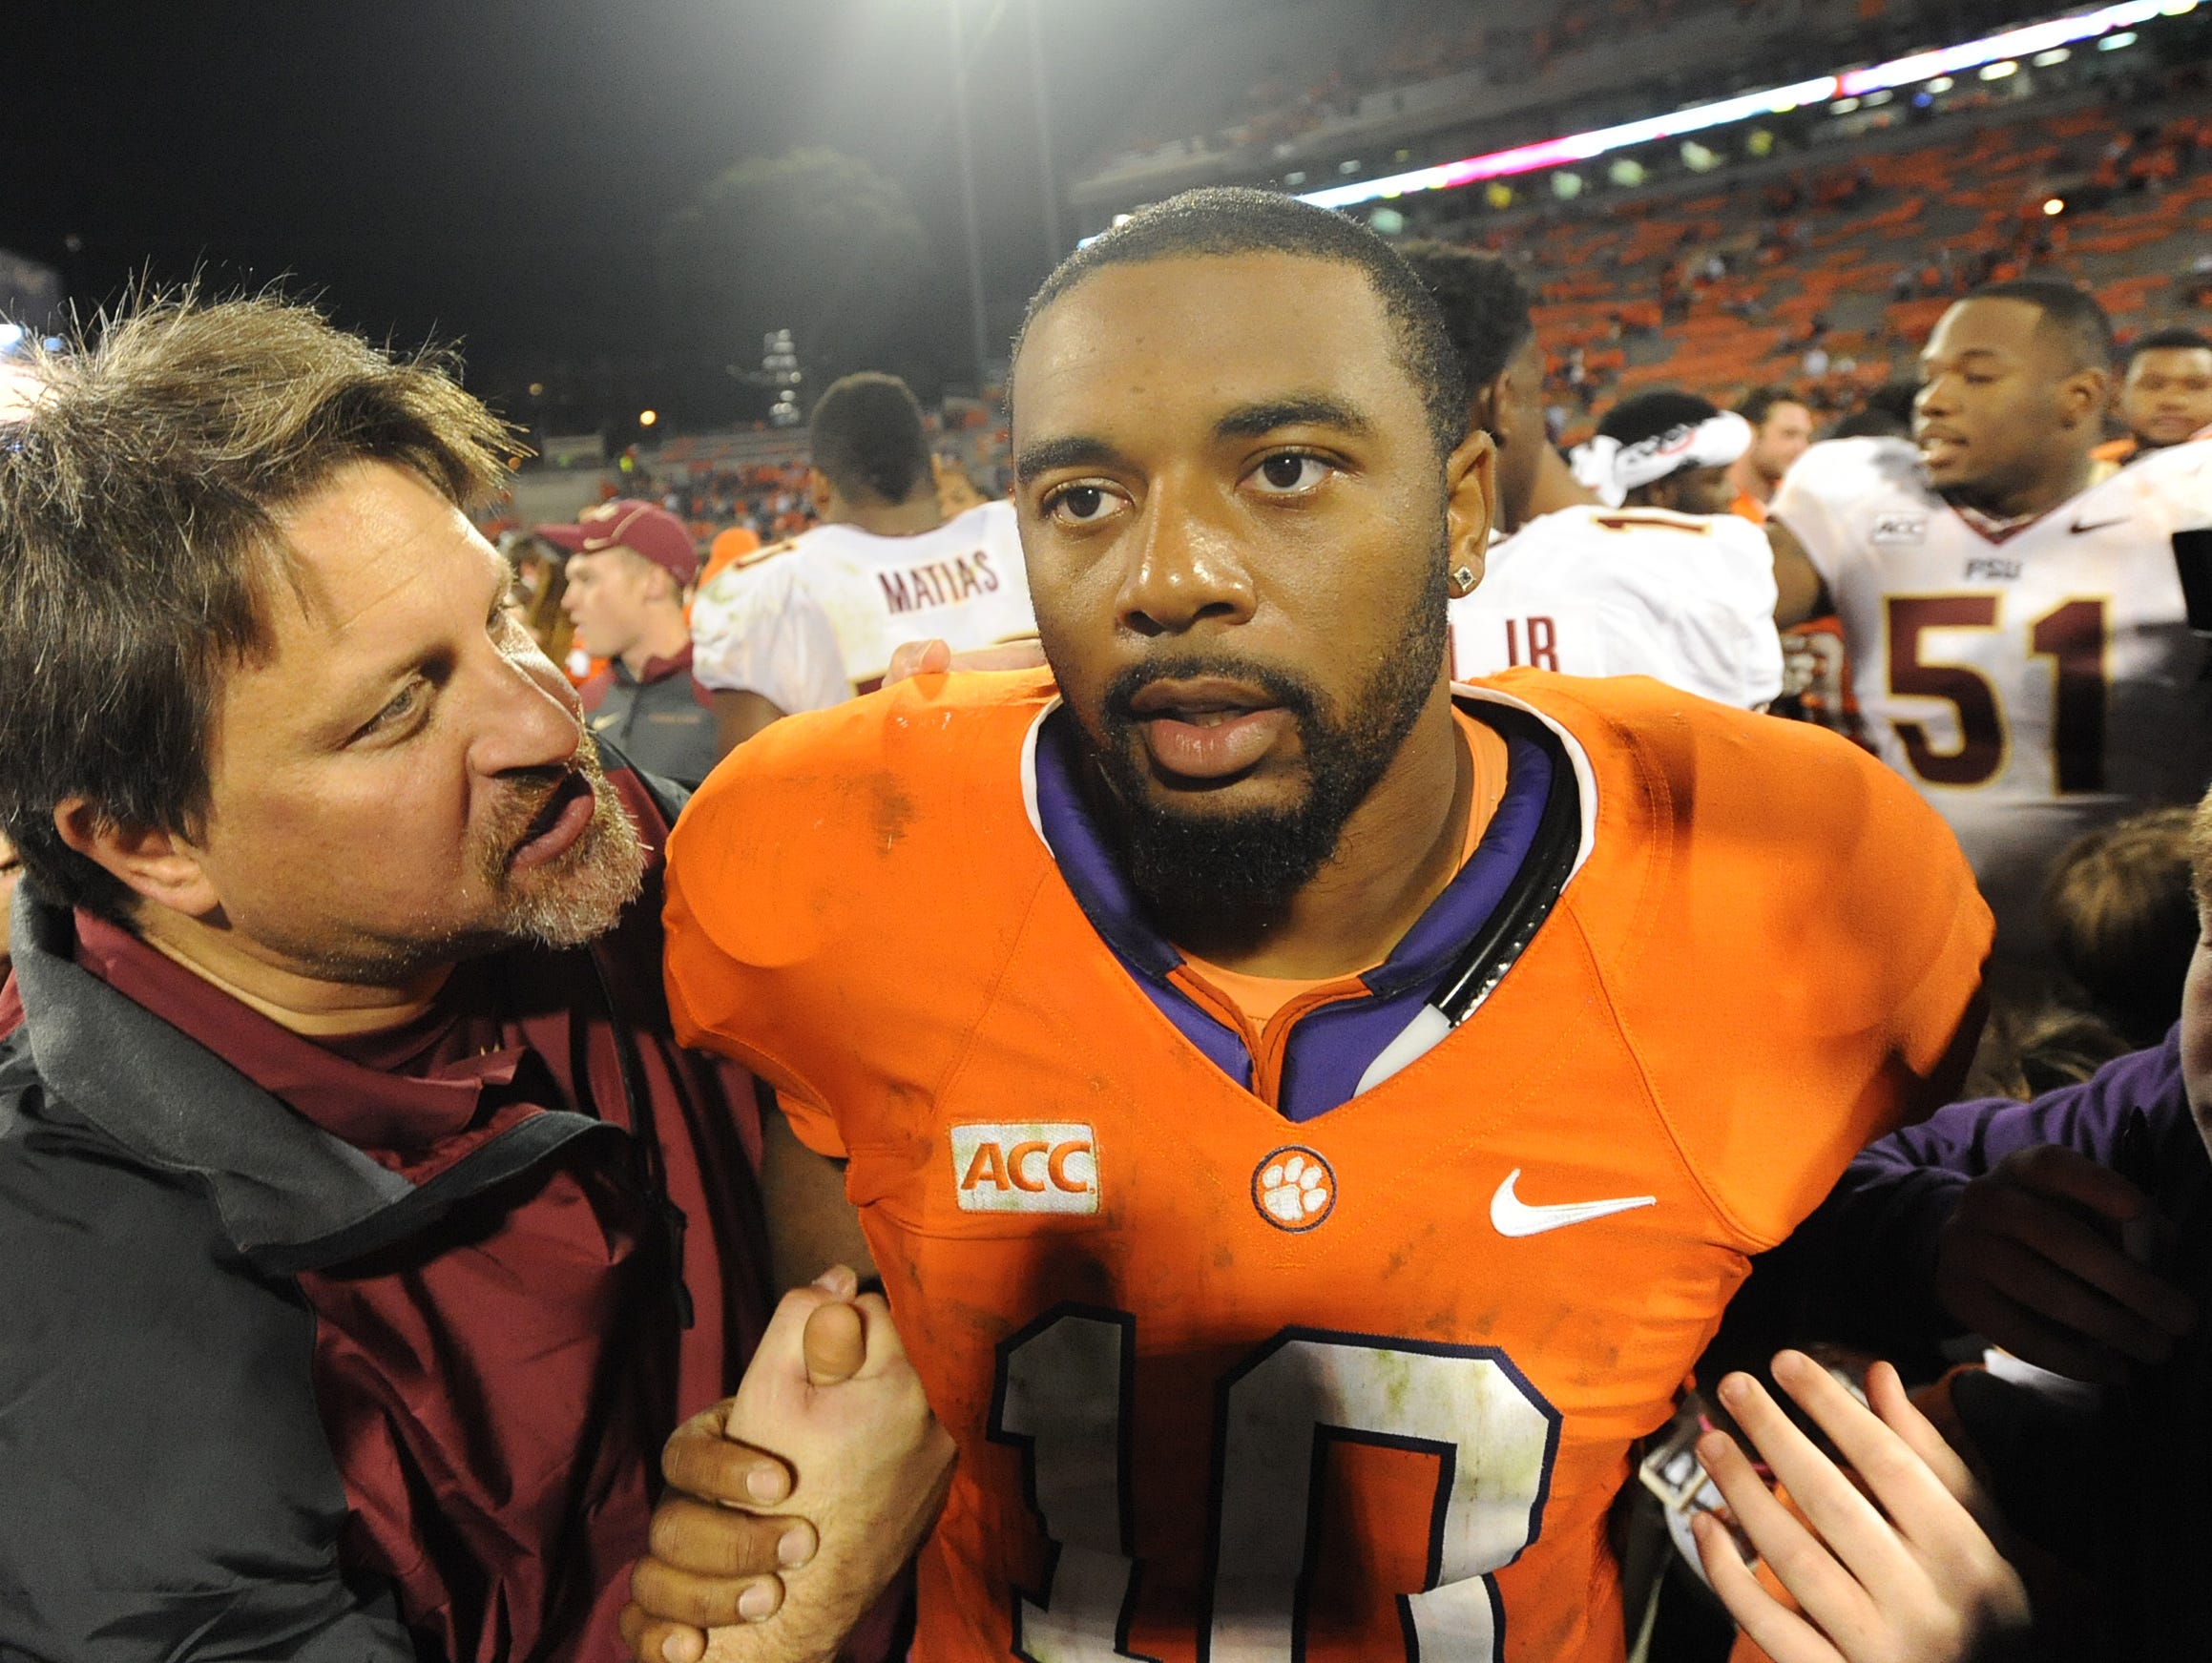 Clemson quarterback Tajh Boyd (10) after the Tigers 51-14 loss to Florida State Saturday, October 19, 2013 at Clemson's Memorial Stadium. BART BOATWRIGHT/Staff